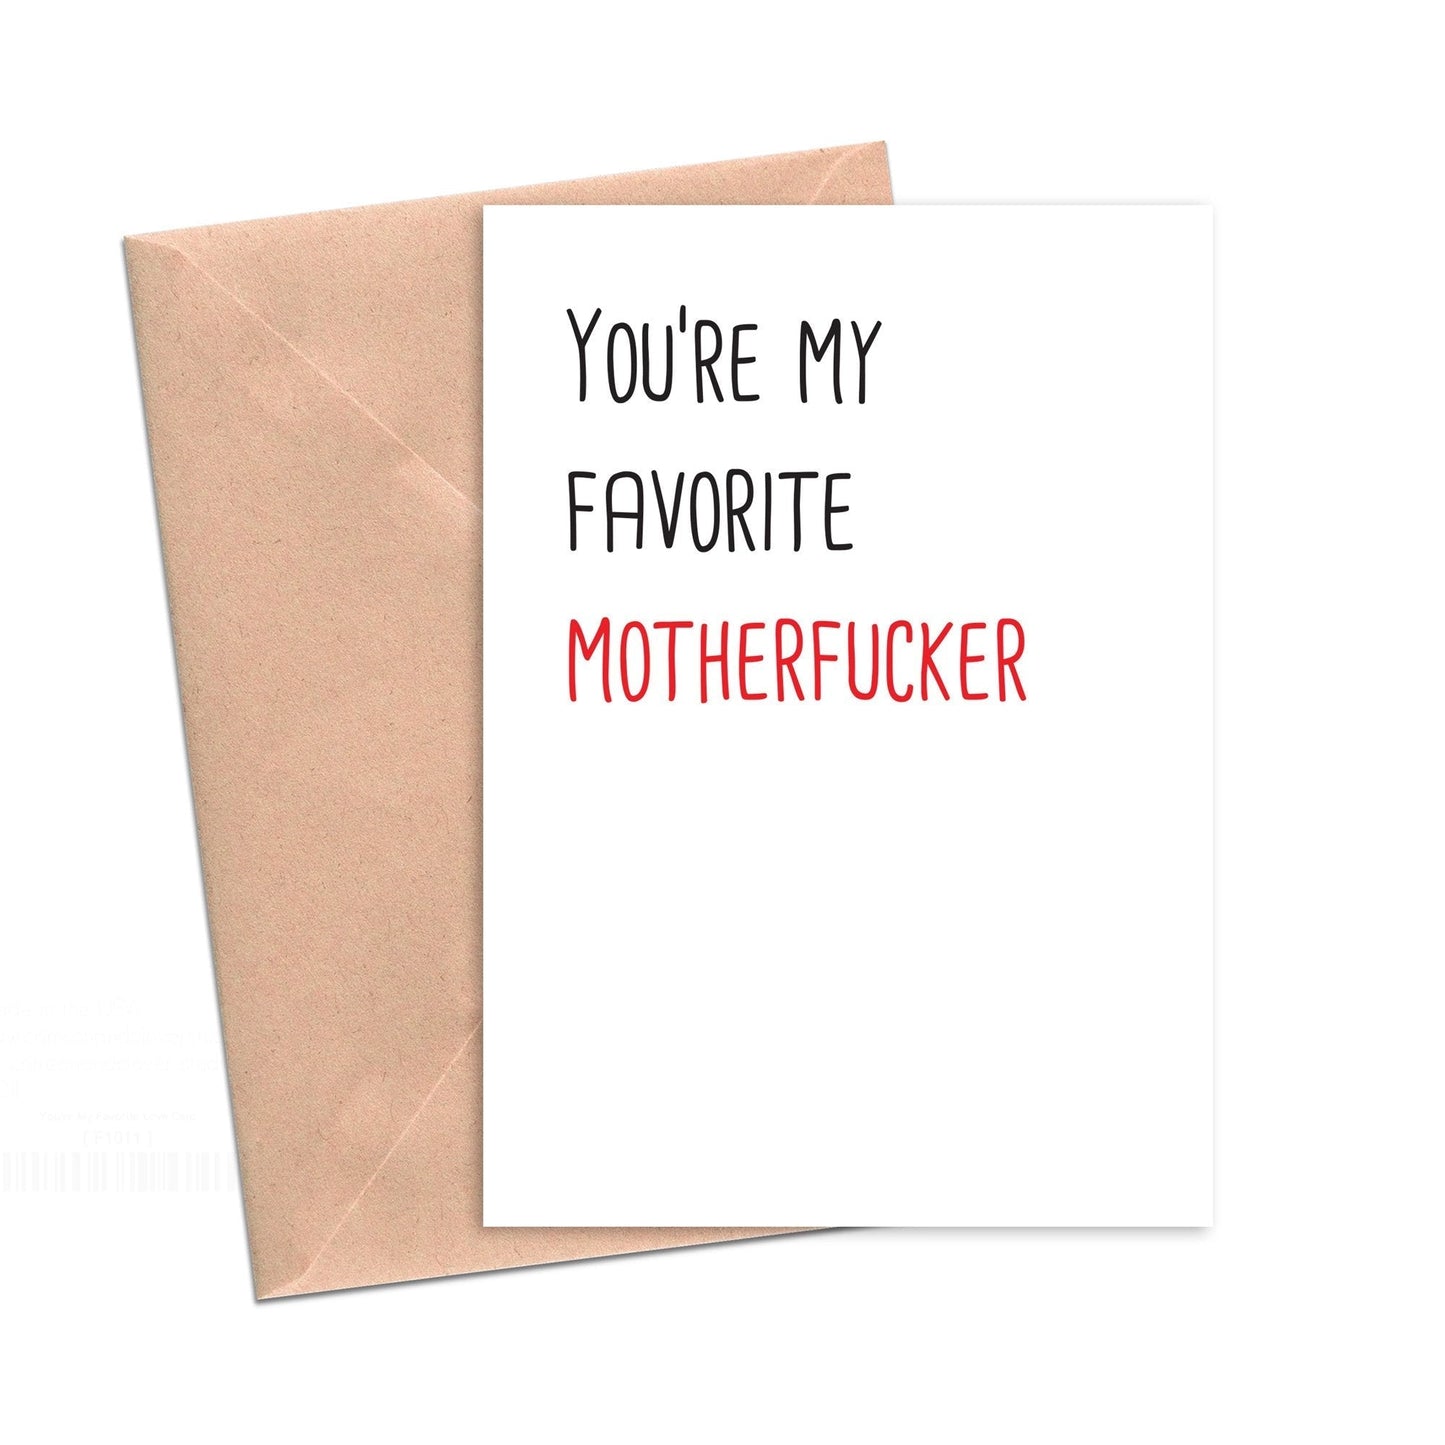 Funny Love Card You're My Favorite Motherfucker Love Card-Love Cards-Crimson and Clover Studio